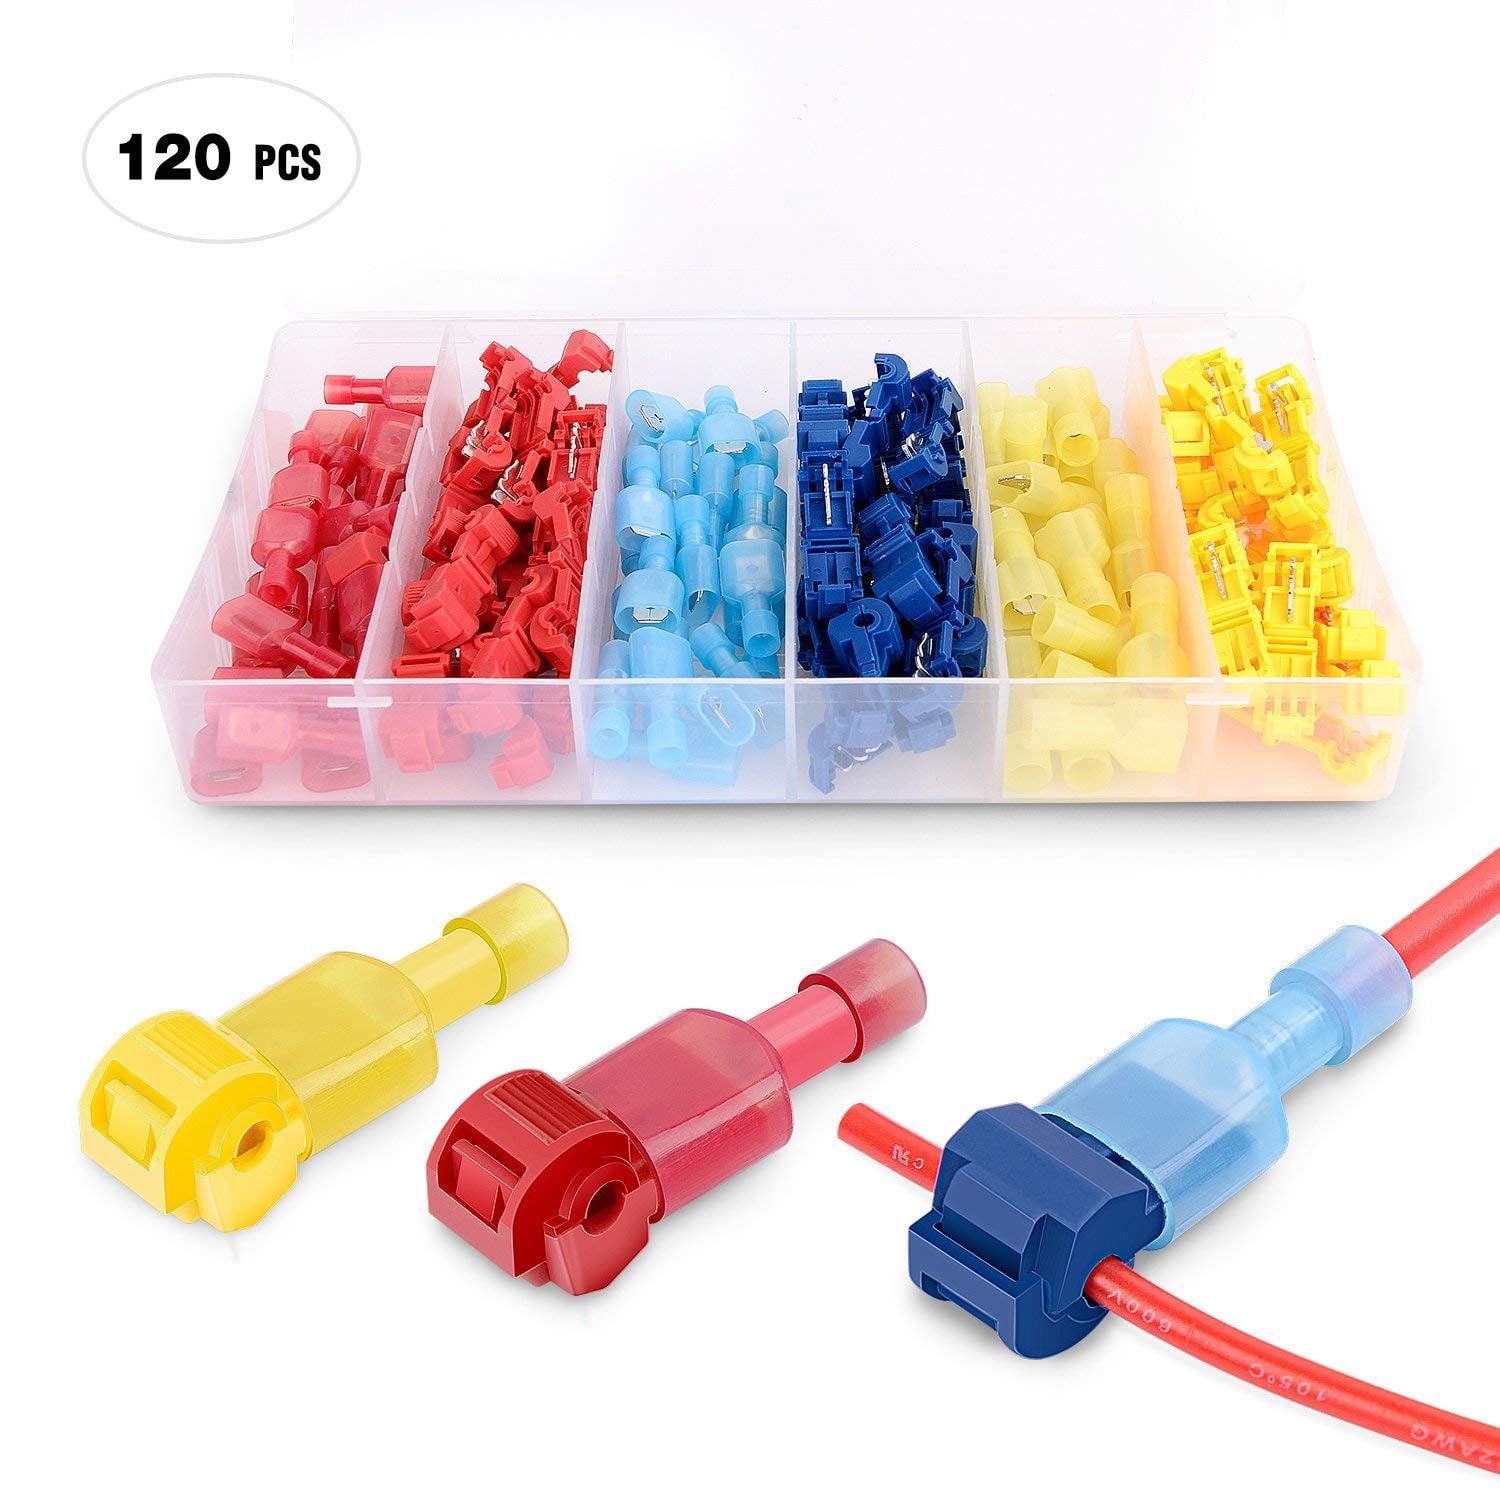 120 Pcs Assorted Insulated Ring Crimp Terminals Car Electrical Wiring Connectors 